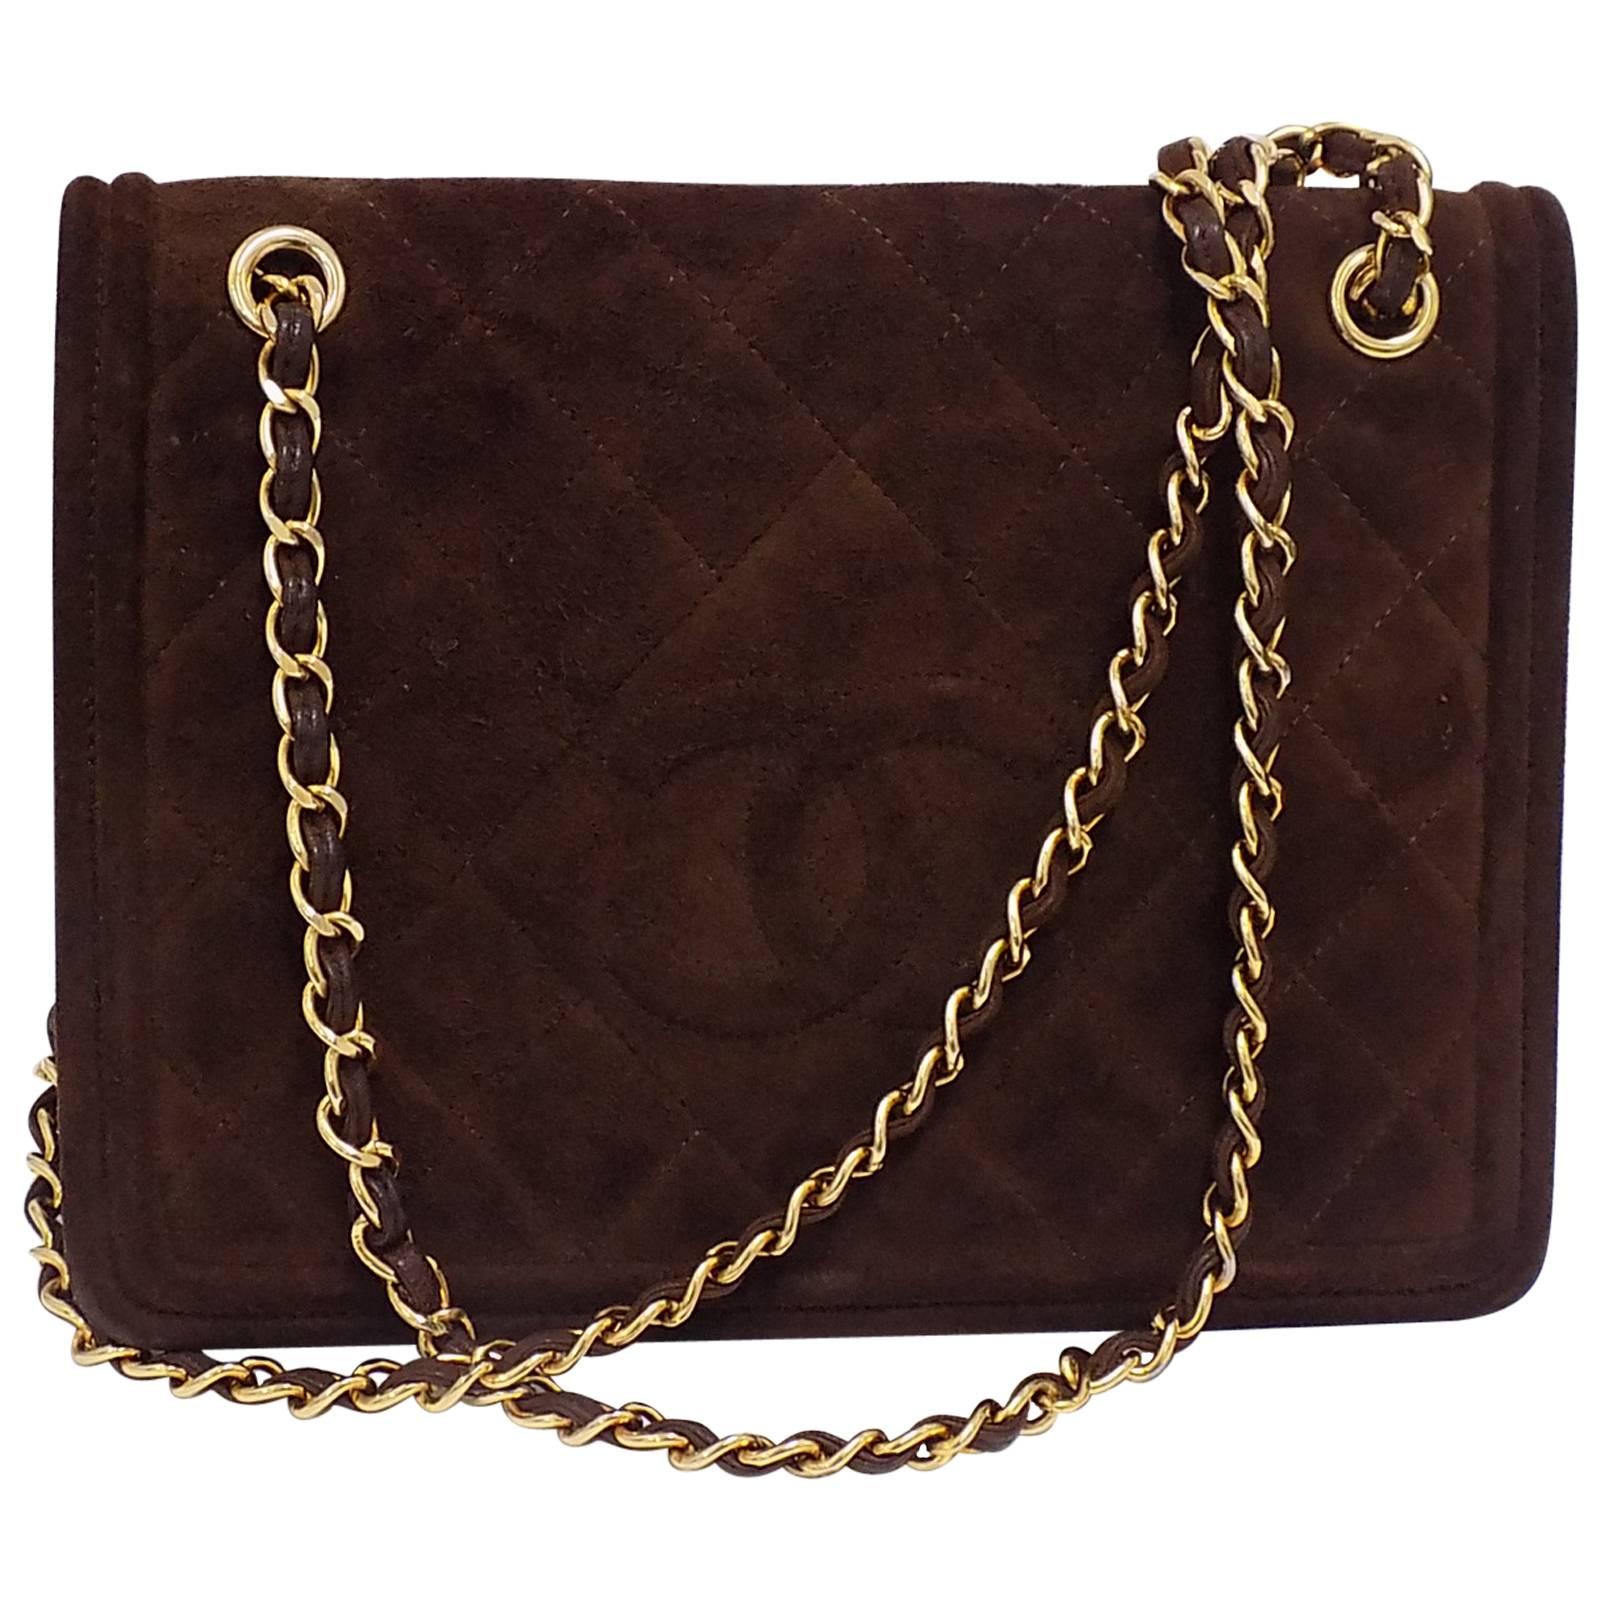 Chanel quilted suede brown suede flap bag  For Sale